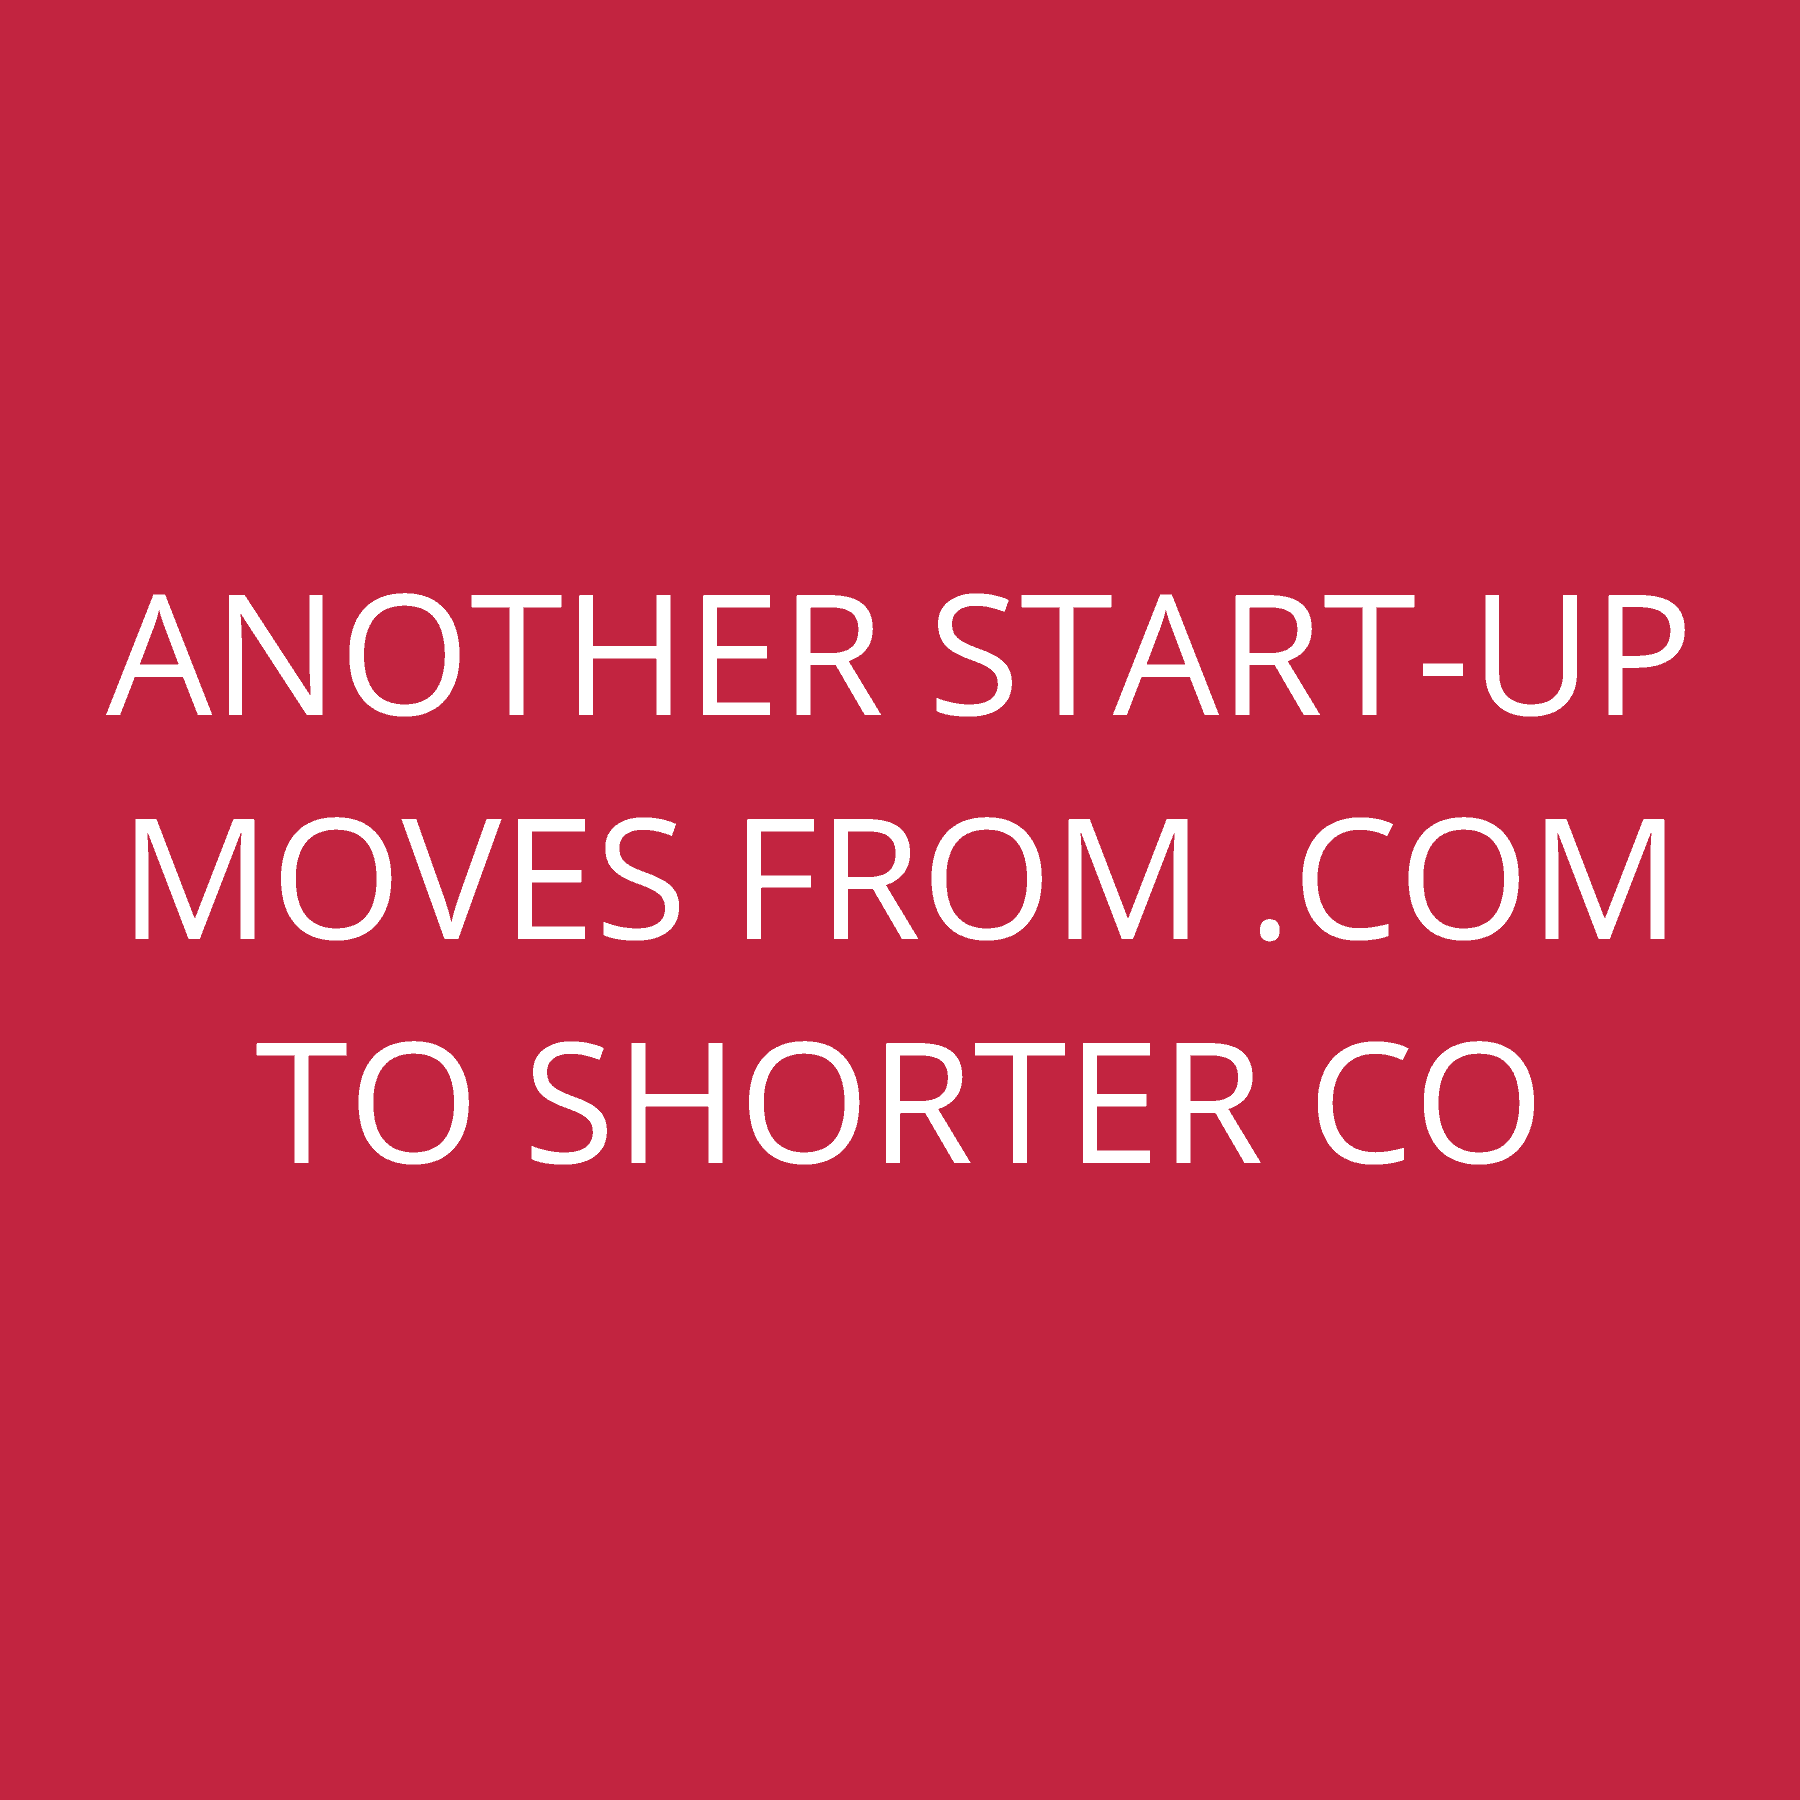 Another start-up moves from .com to shorter .co